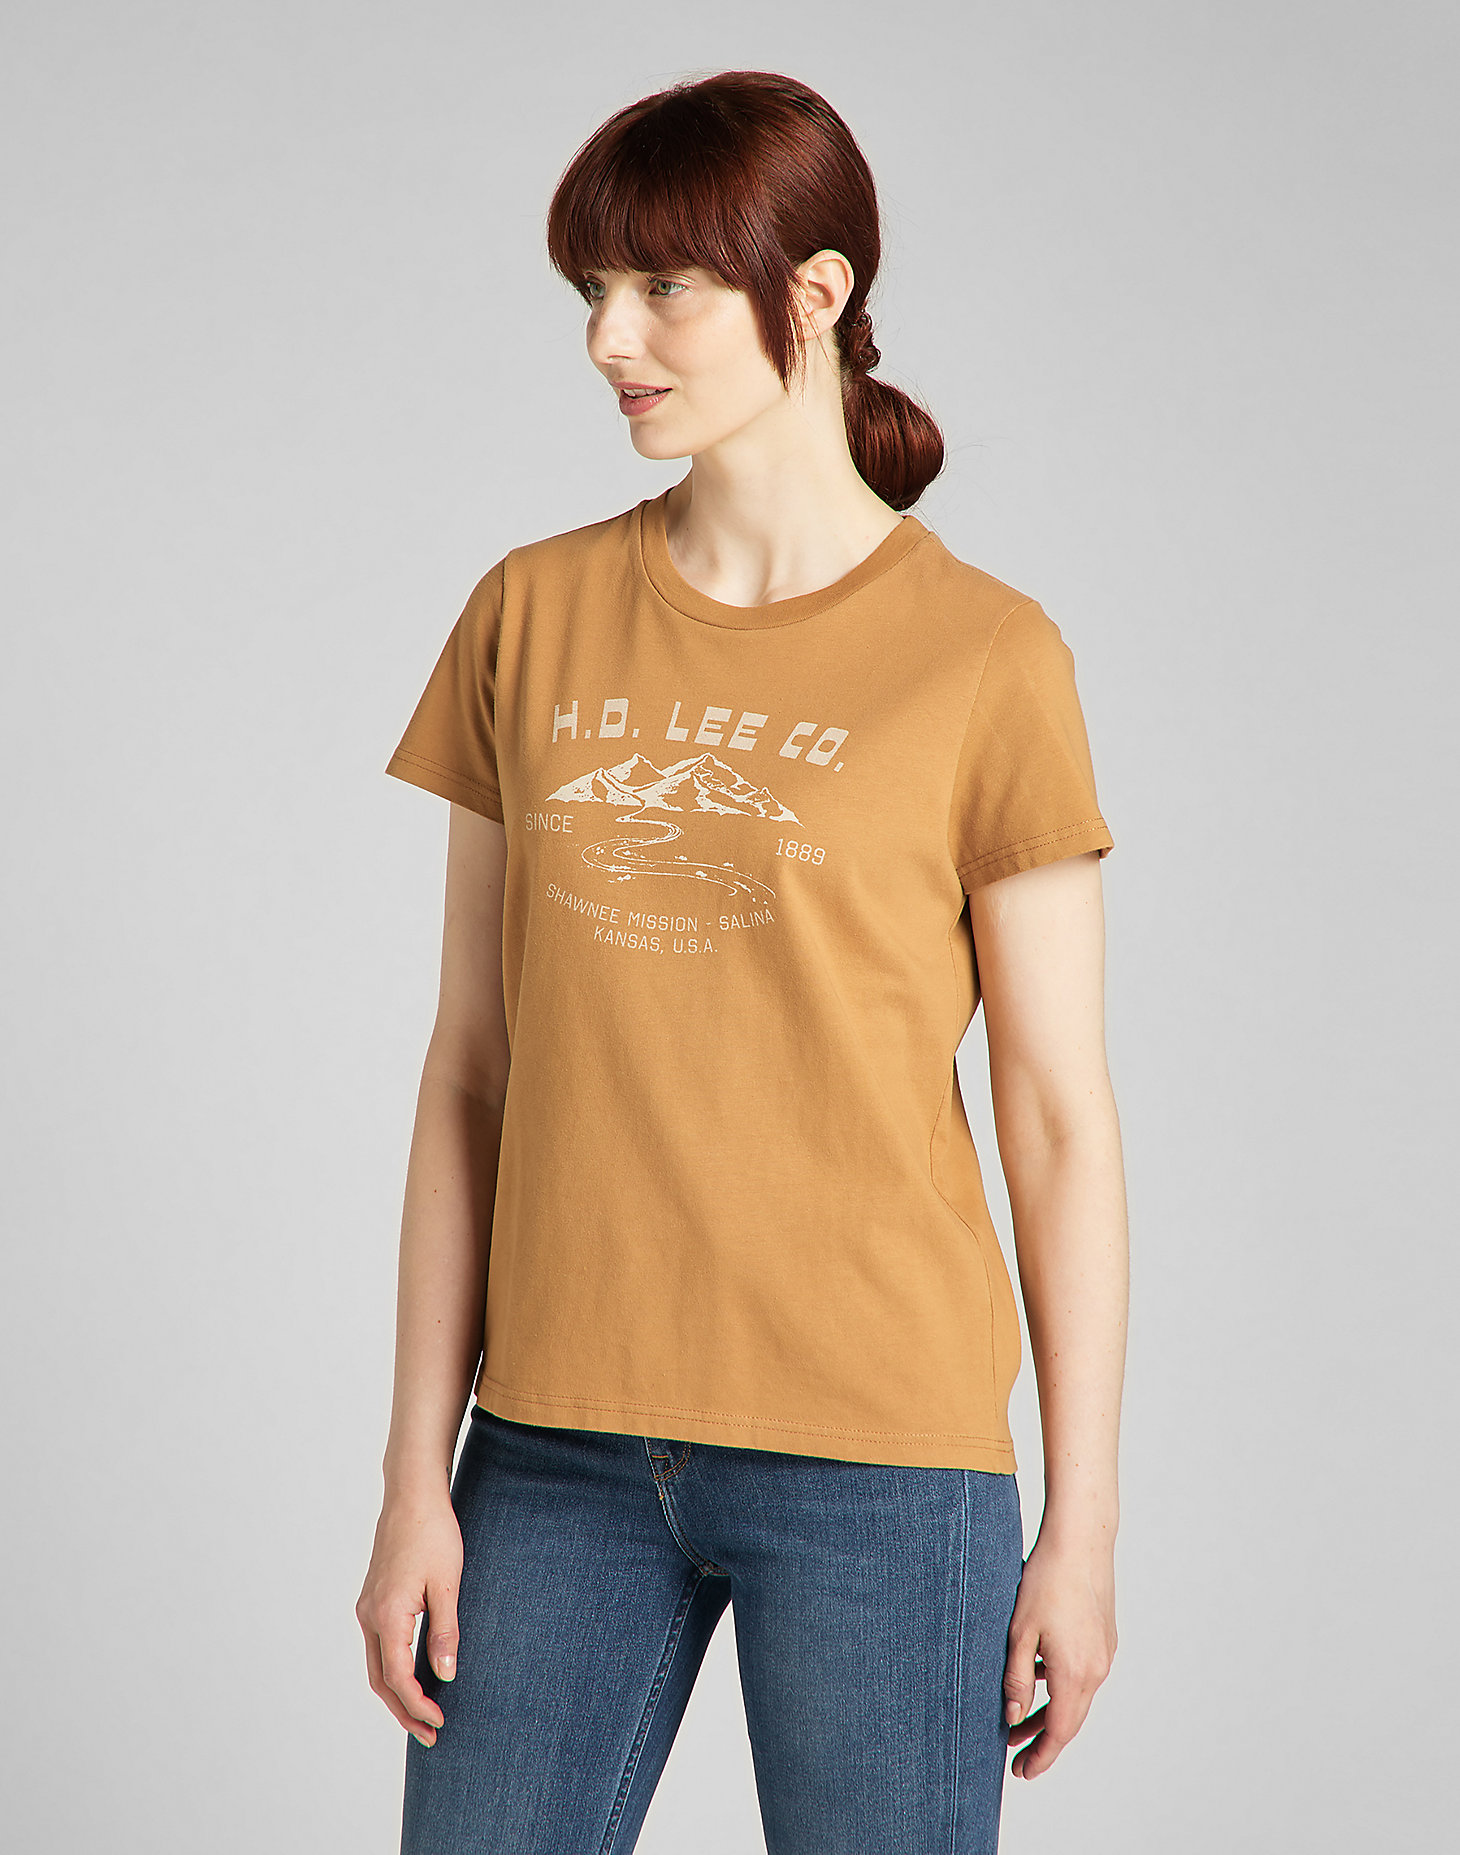 Easy Graphic Tee in Tobacco Brown alternative view 3